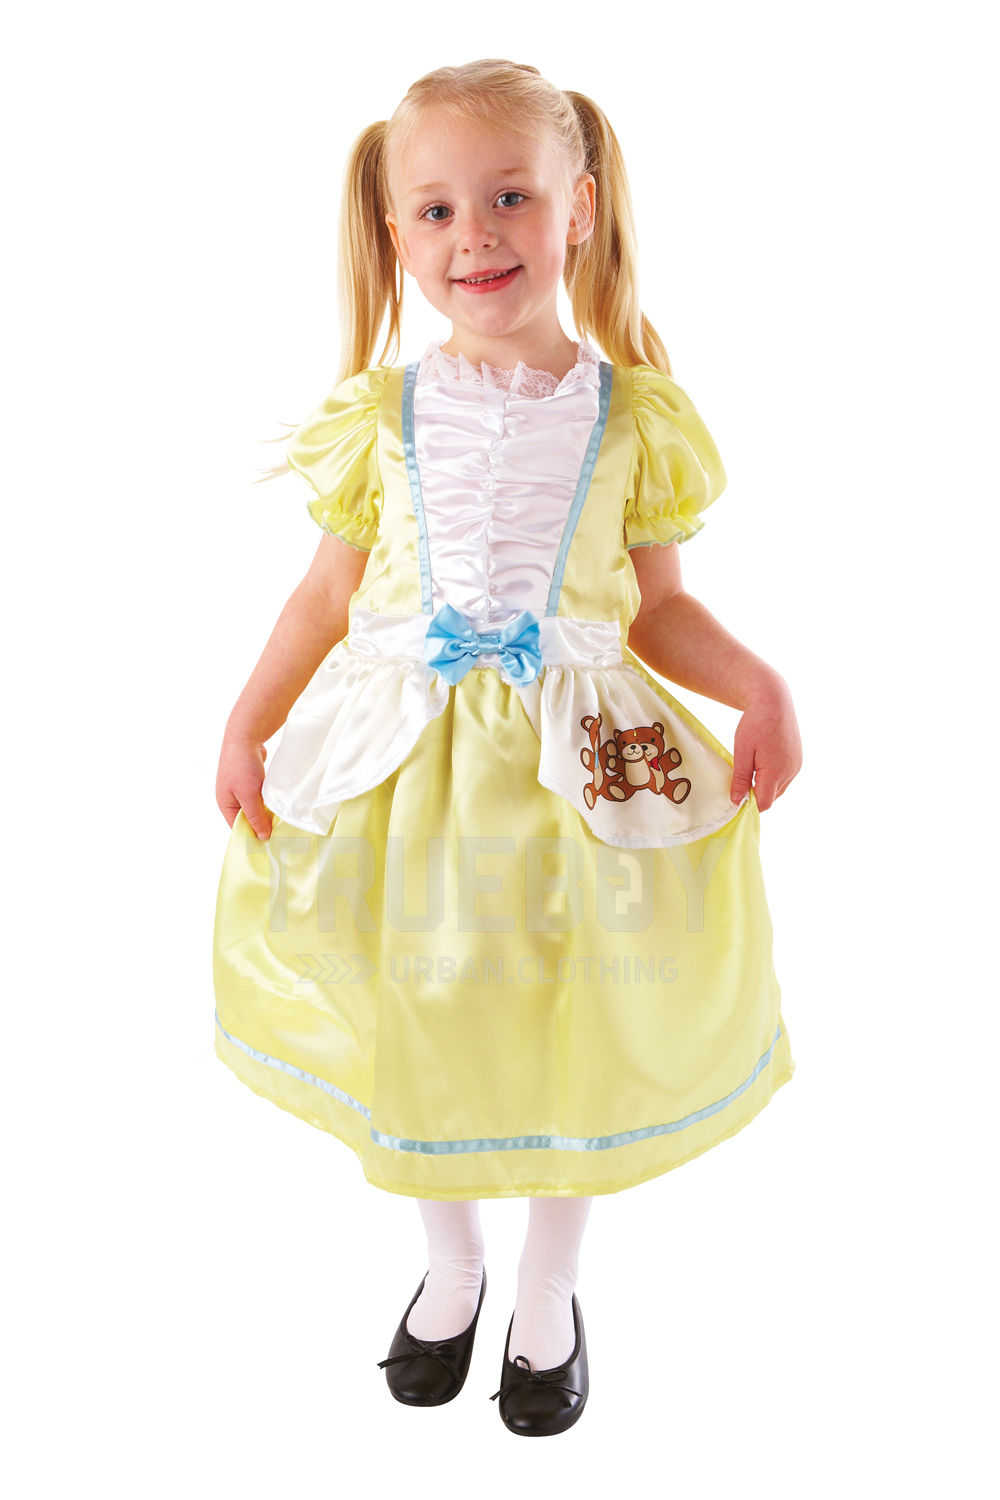 Girls Goldilocks Costume Kids World Book Day Party Outfit Fairytale ...